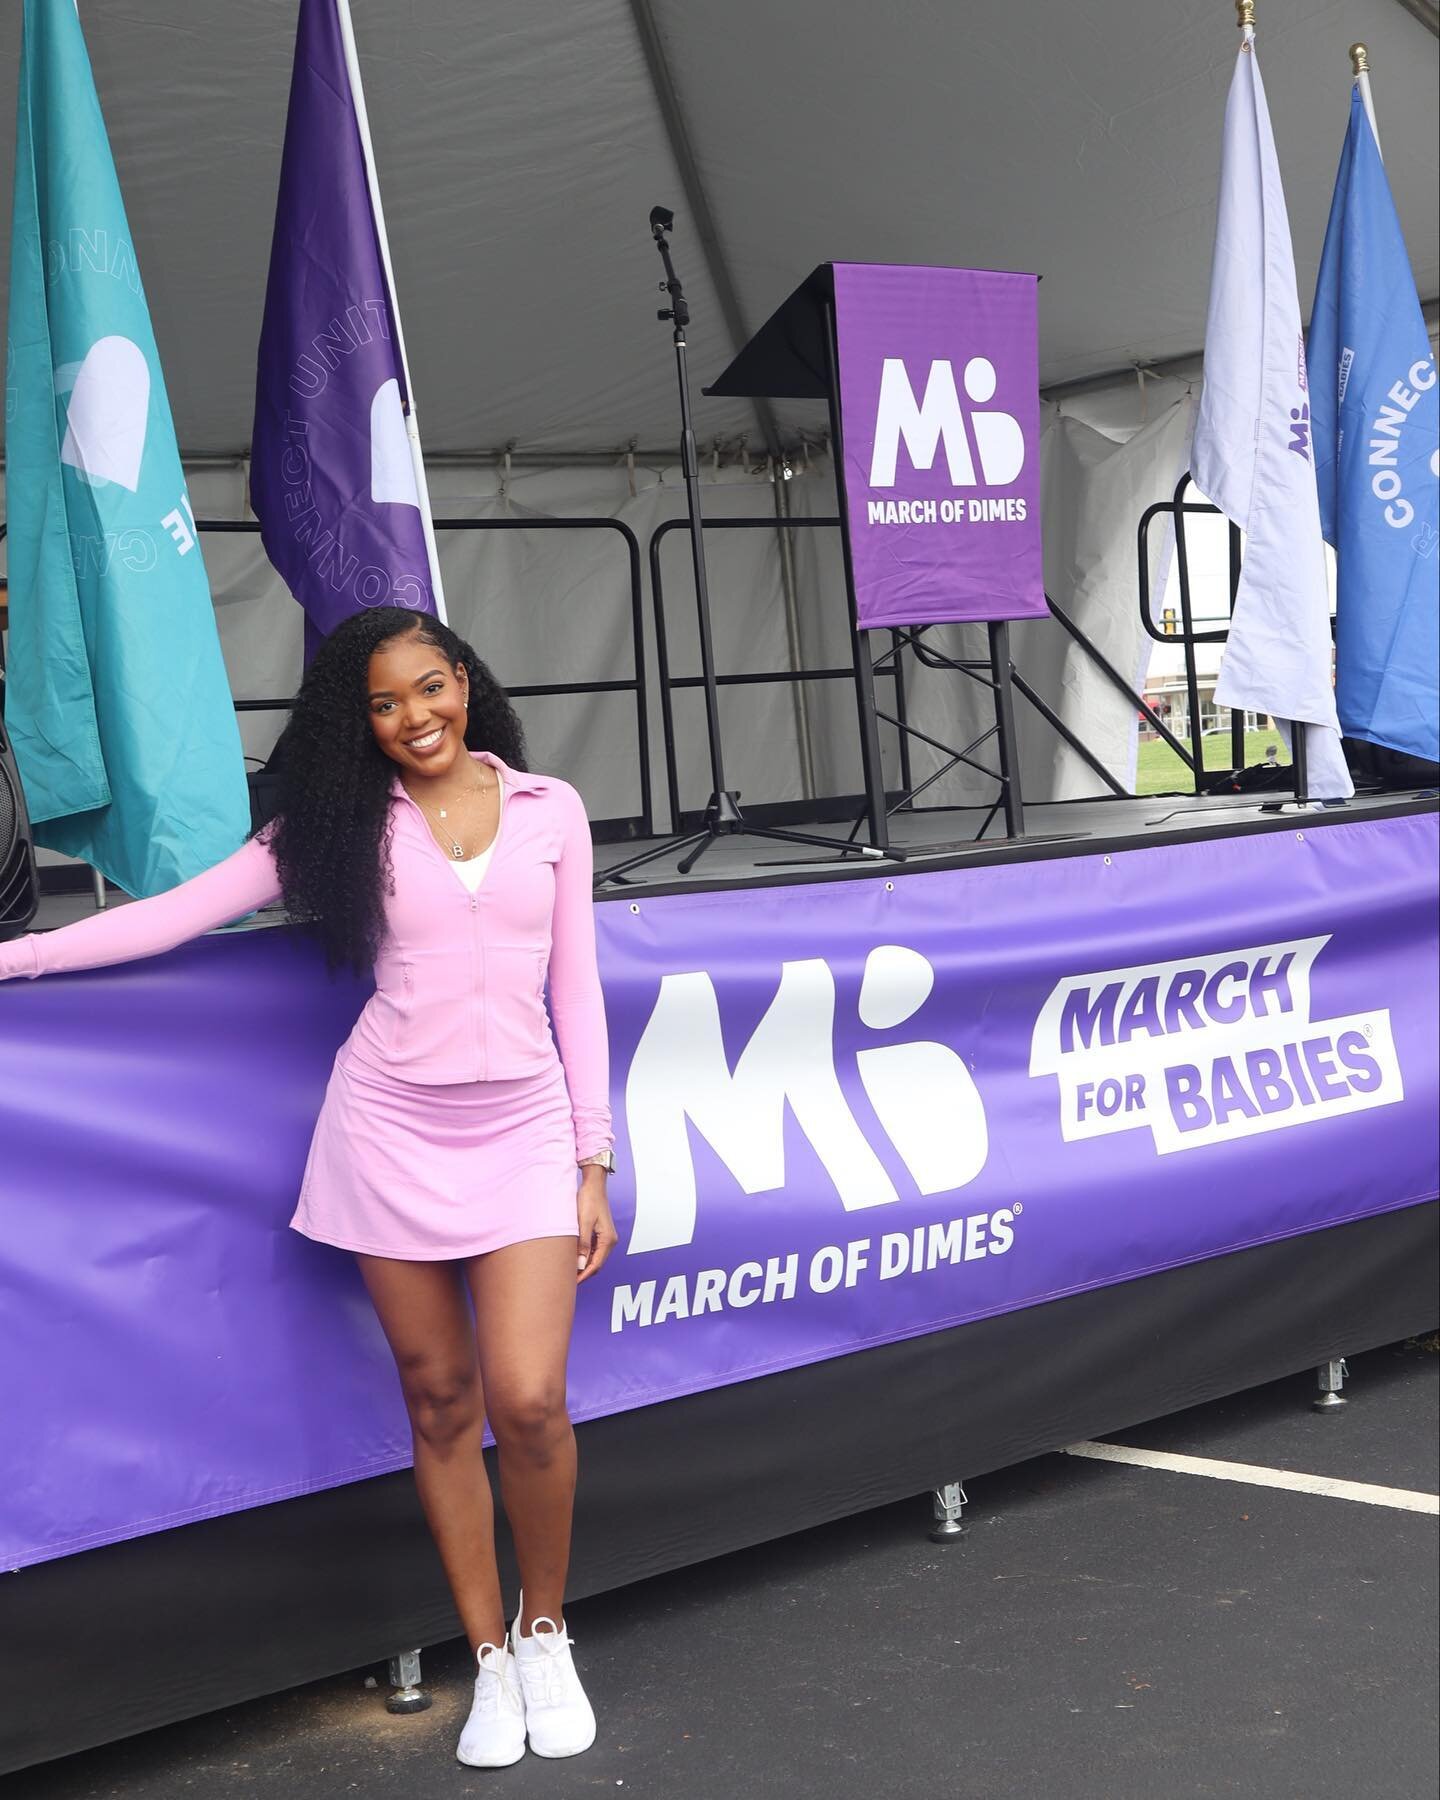 THANK YOU for marching with us this 2023 March for Babies season! Rain or shine, our voices were heard and impact was made for the health of moms and babies! @birthequity4all 

In total, the DMV raised $1,220,262 and counting!!!
✔️National DC March f